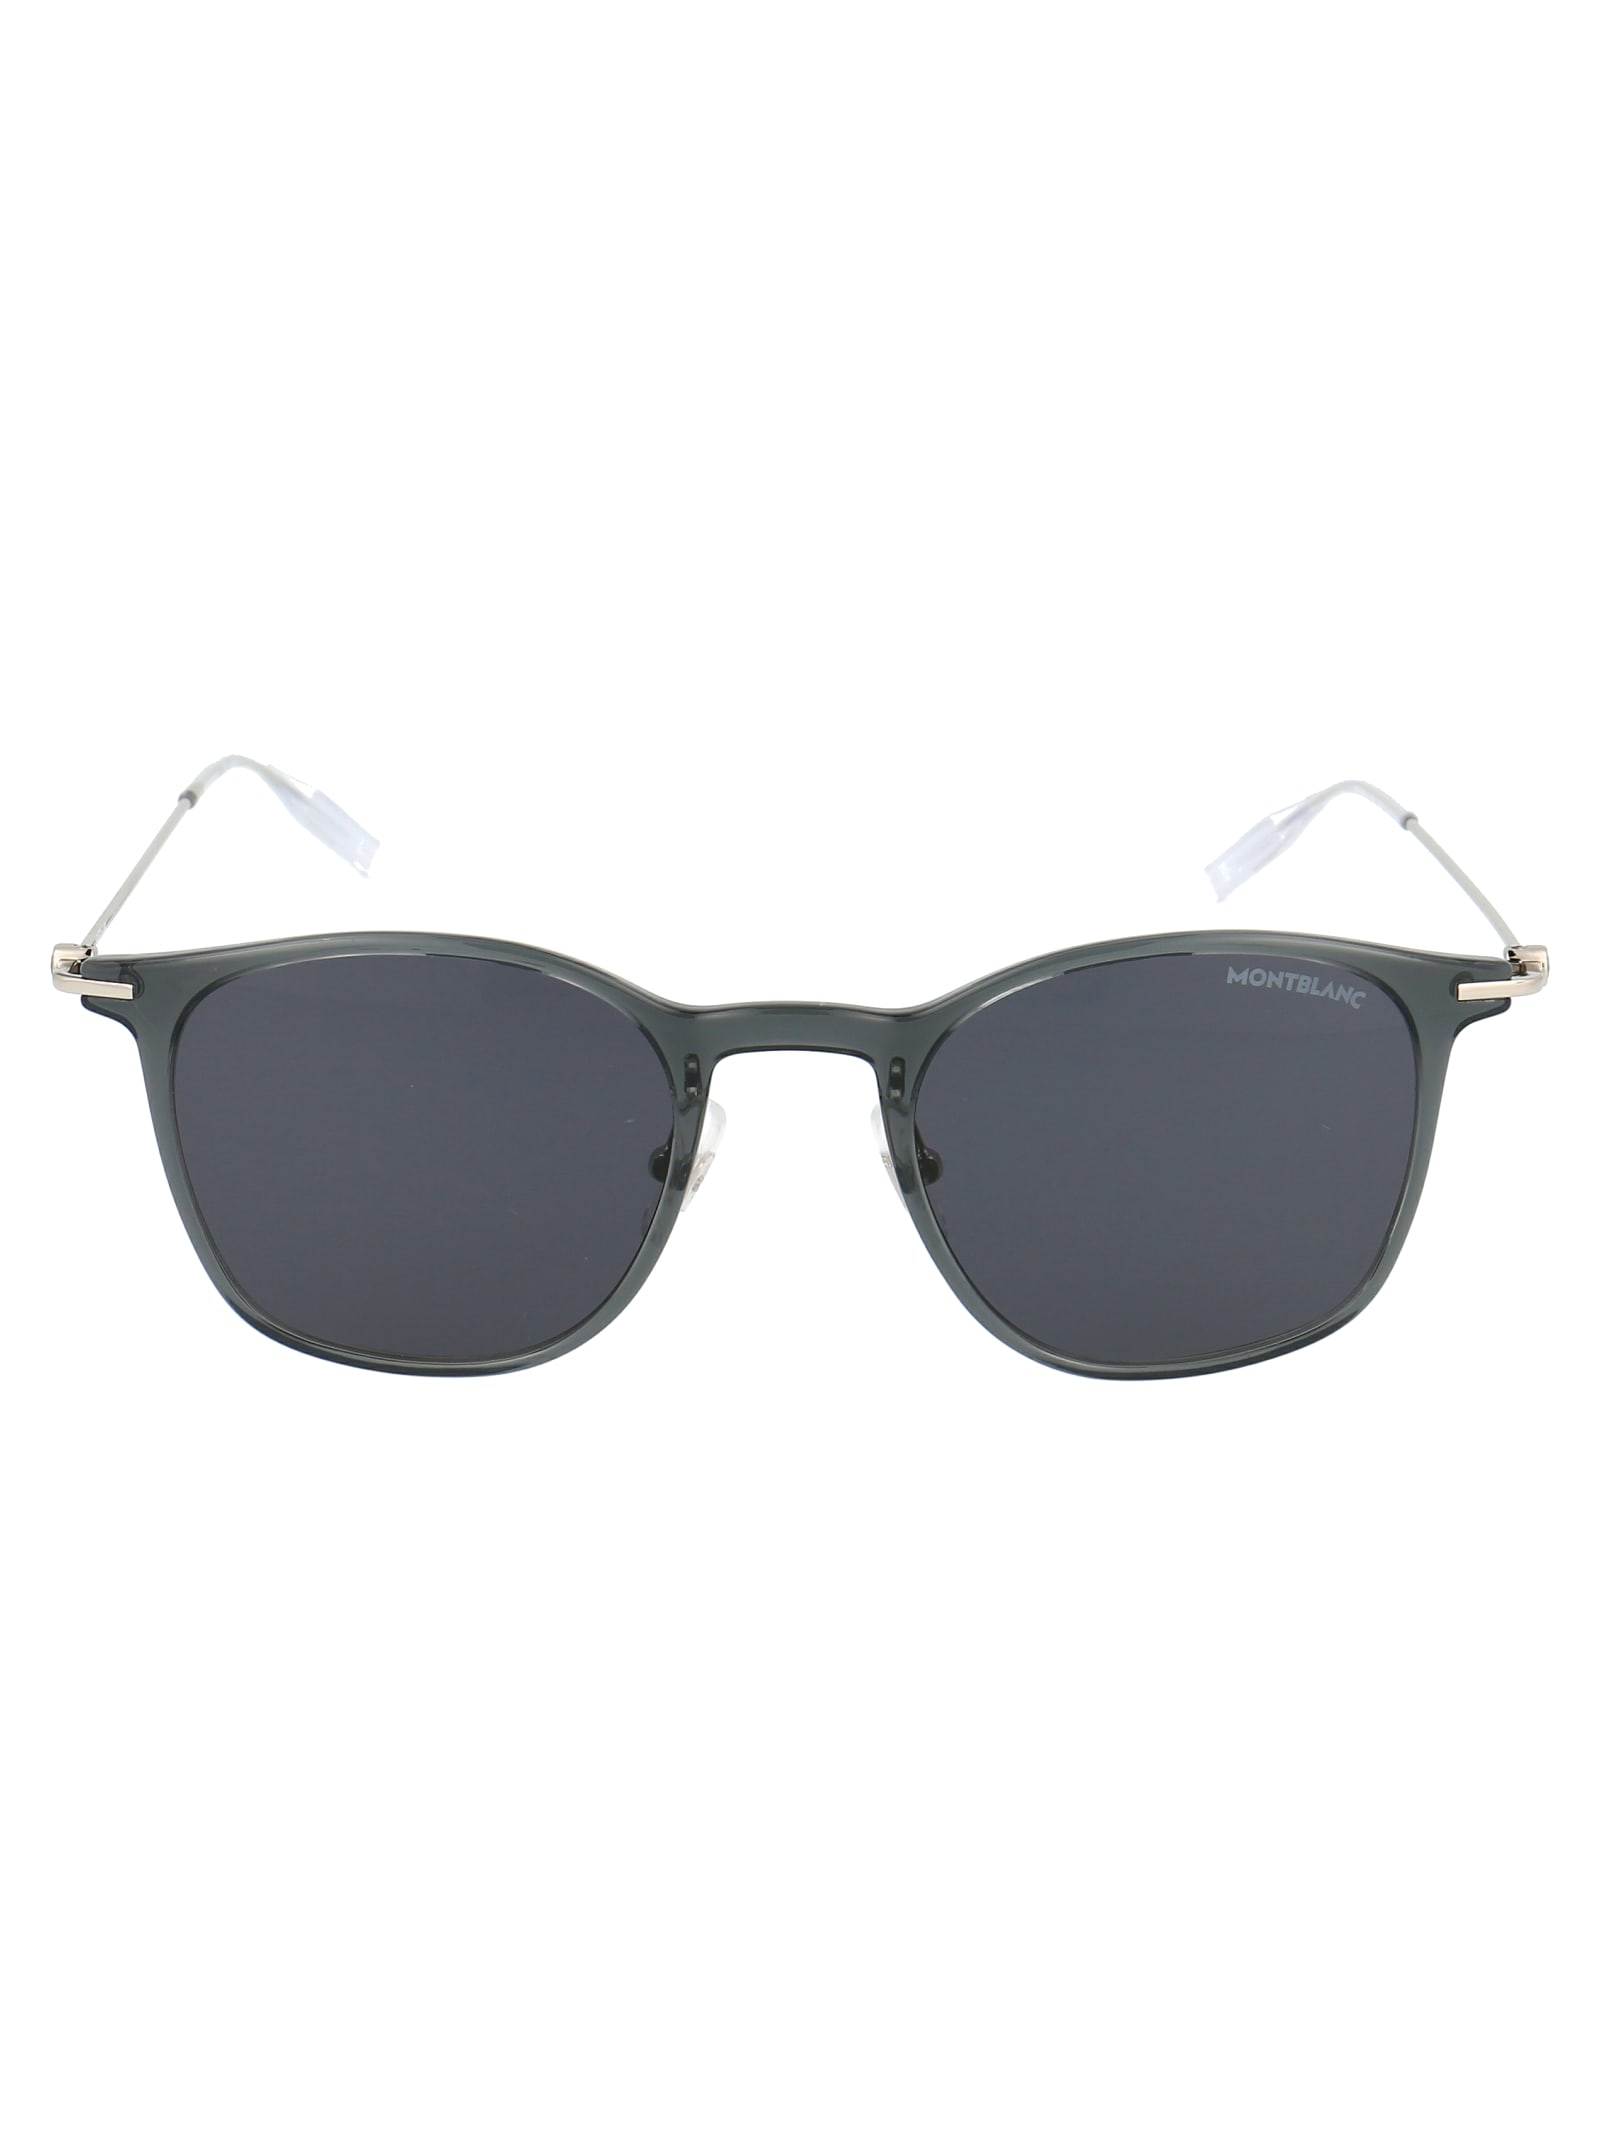 MONTBLANC MB0098S SUNGLASSES,MB0098S 001